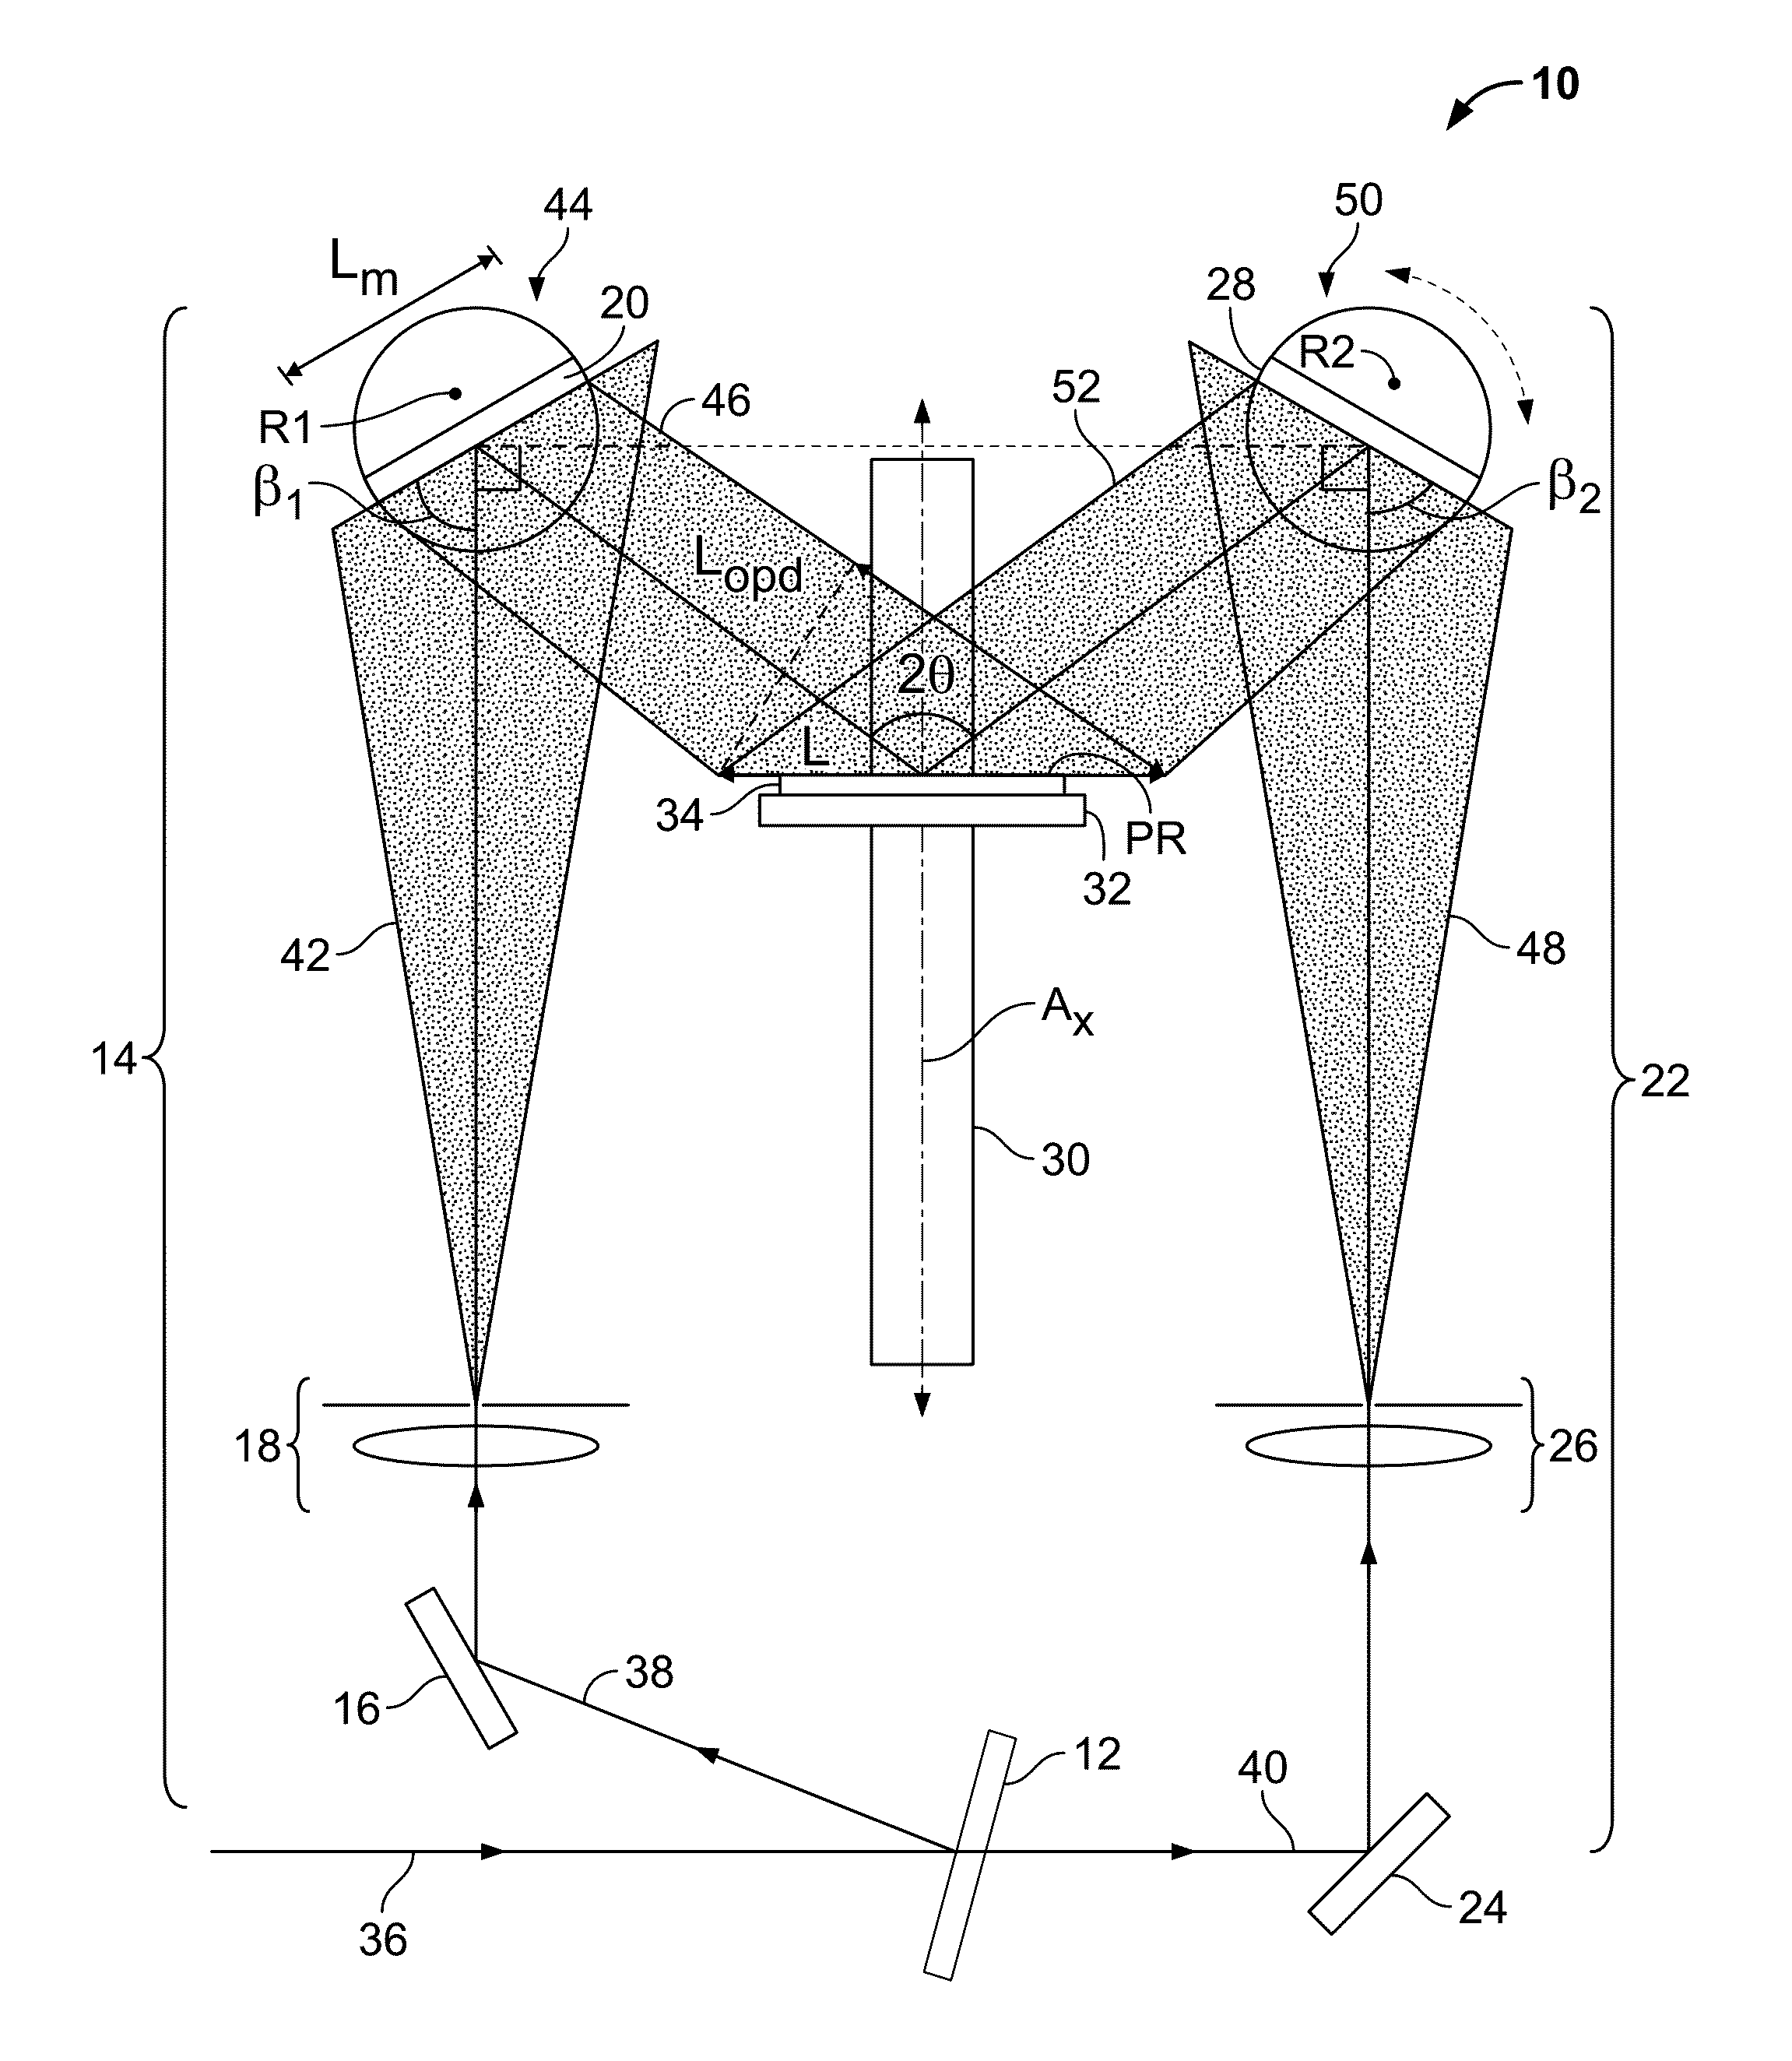 Tunable two-mirror interference lithography system